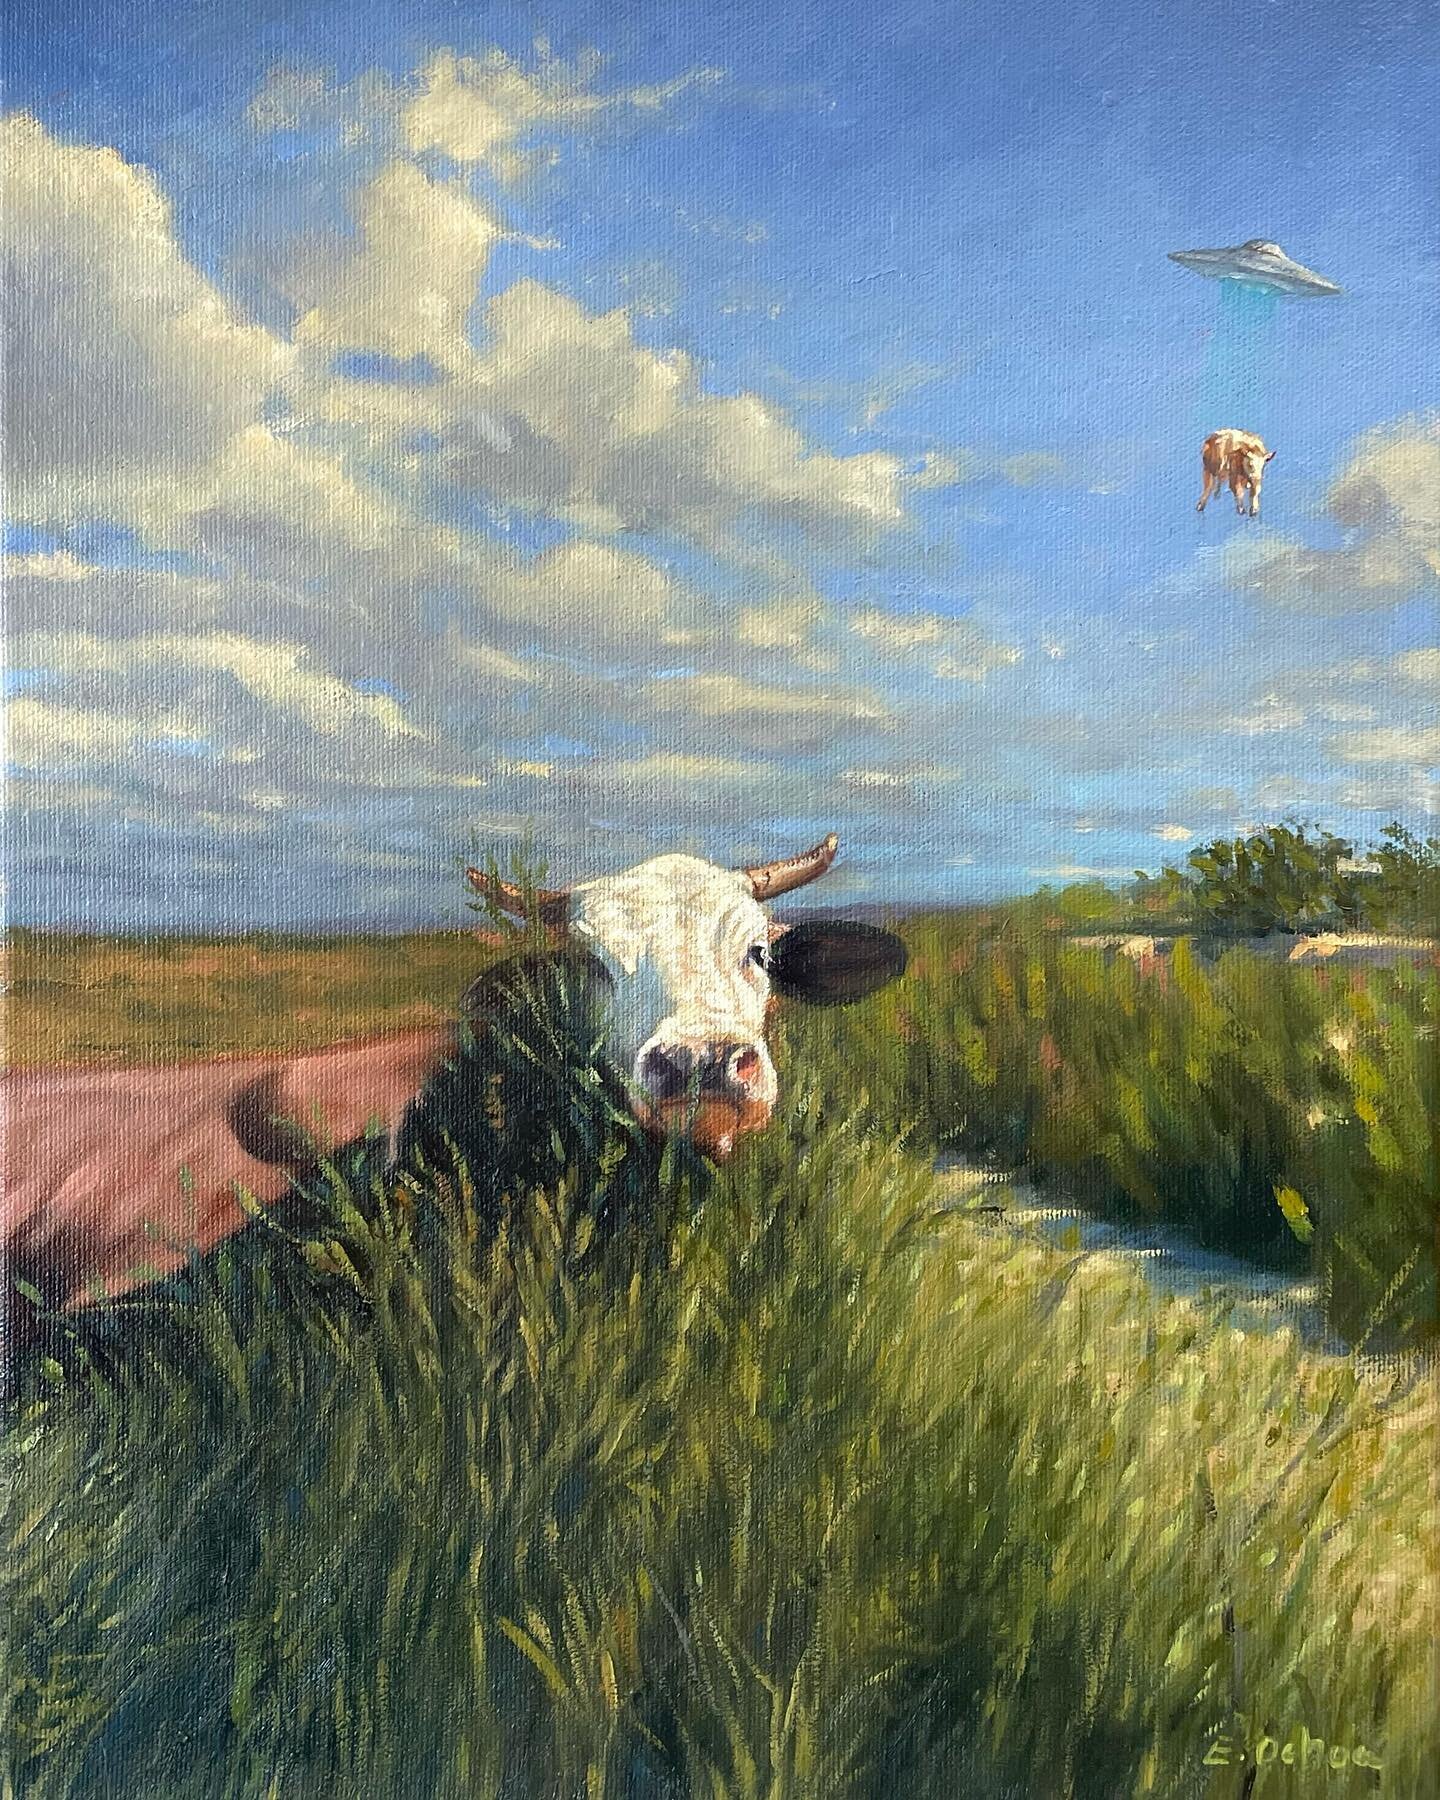 Erick Ochoa just finished this small oil on canvas 11&rdquo; X 14&rdquo; as part of his Adios Amigo series,&rdquo;. This cow hiding in the bushes is a little smarter than the others!
.
.
.
.
#oilpainting #cowpainting #ufo#mexico #todossantosmexico #a